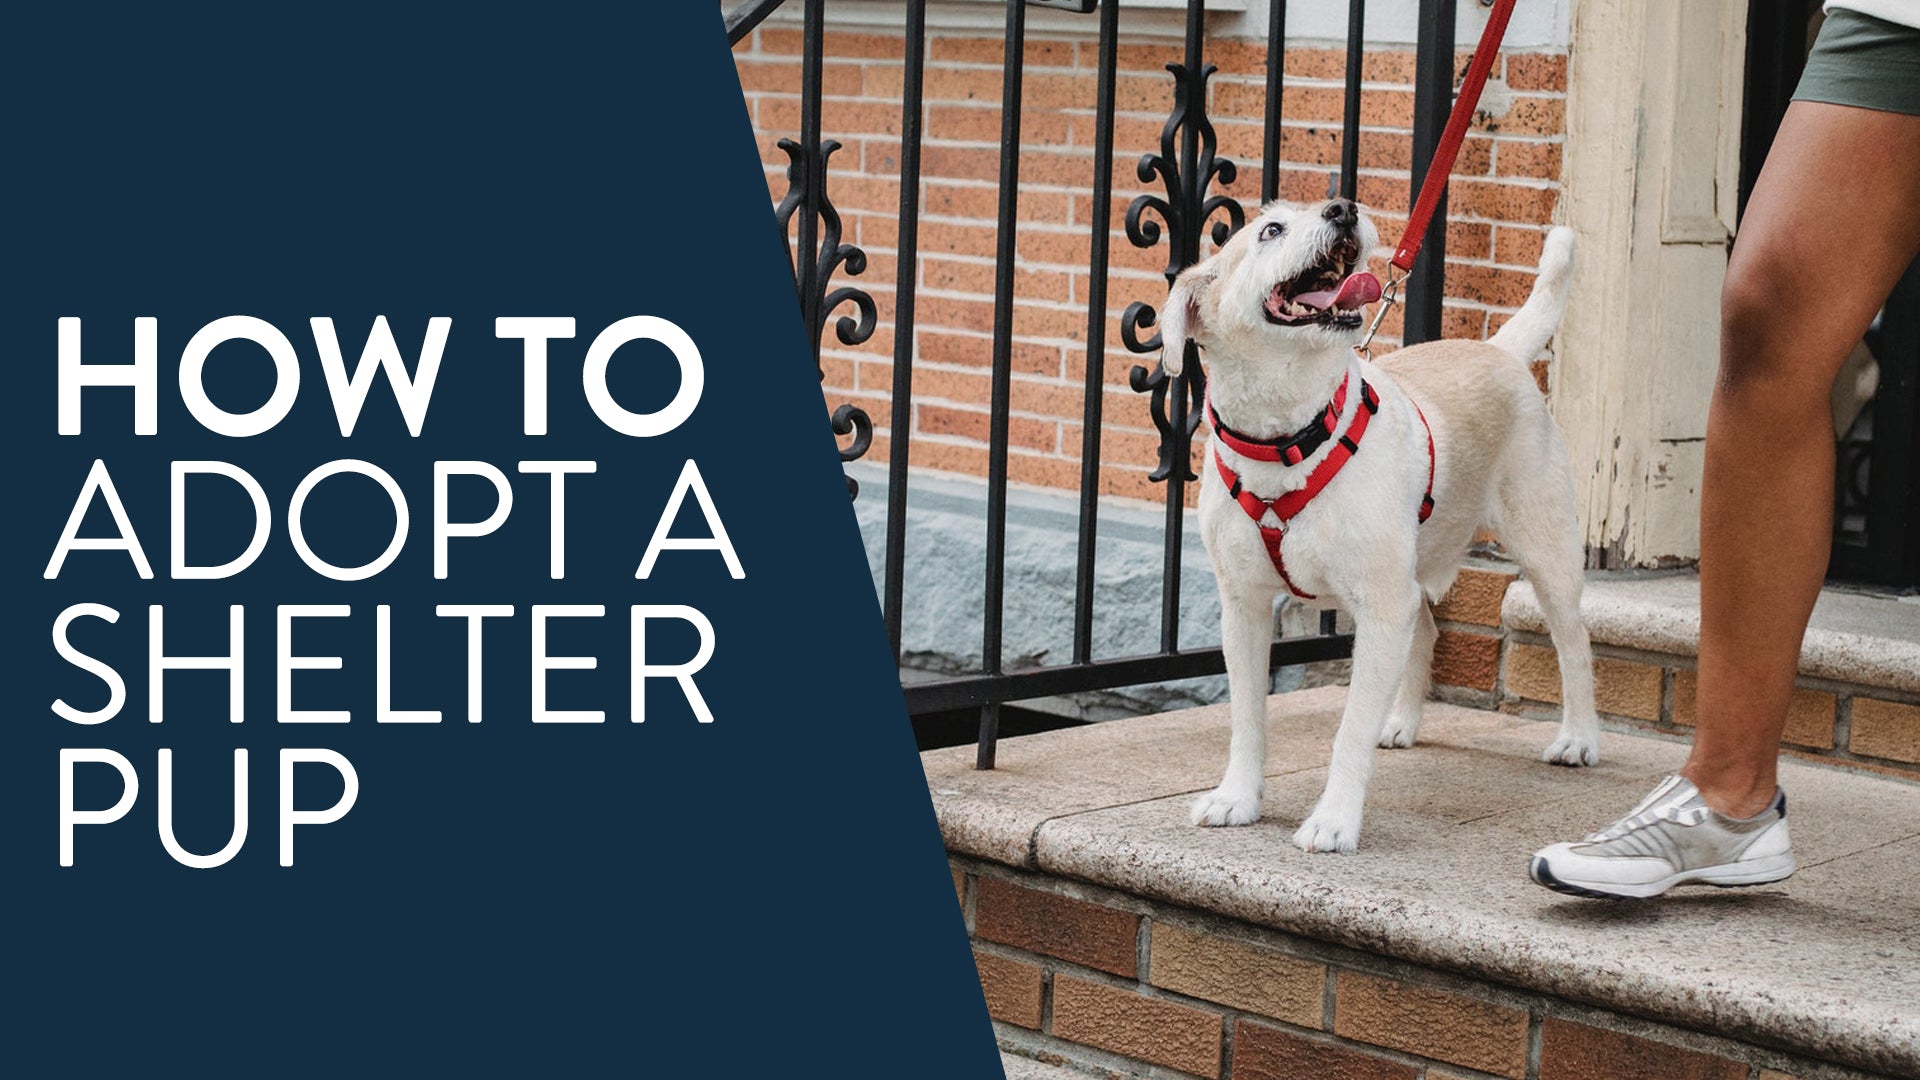 How To Adopt A Shelter Pup